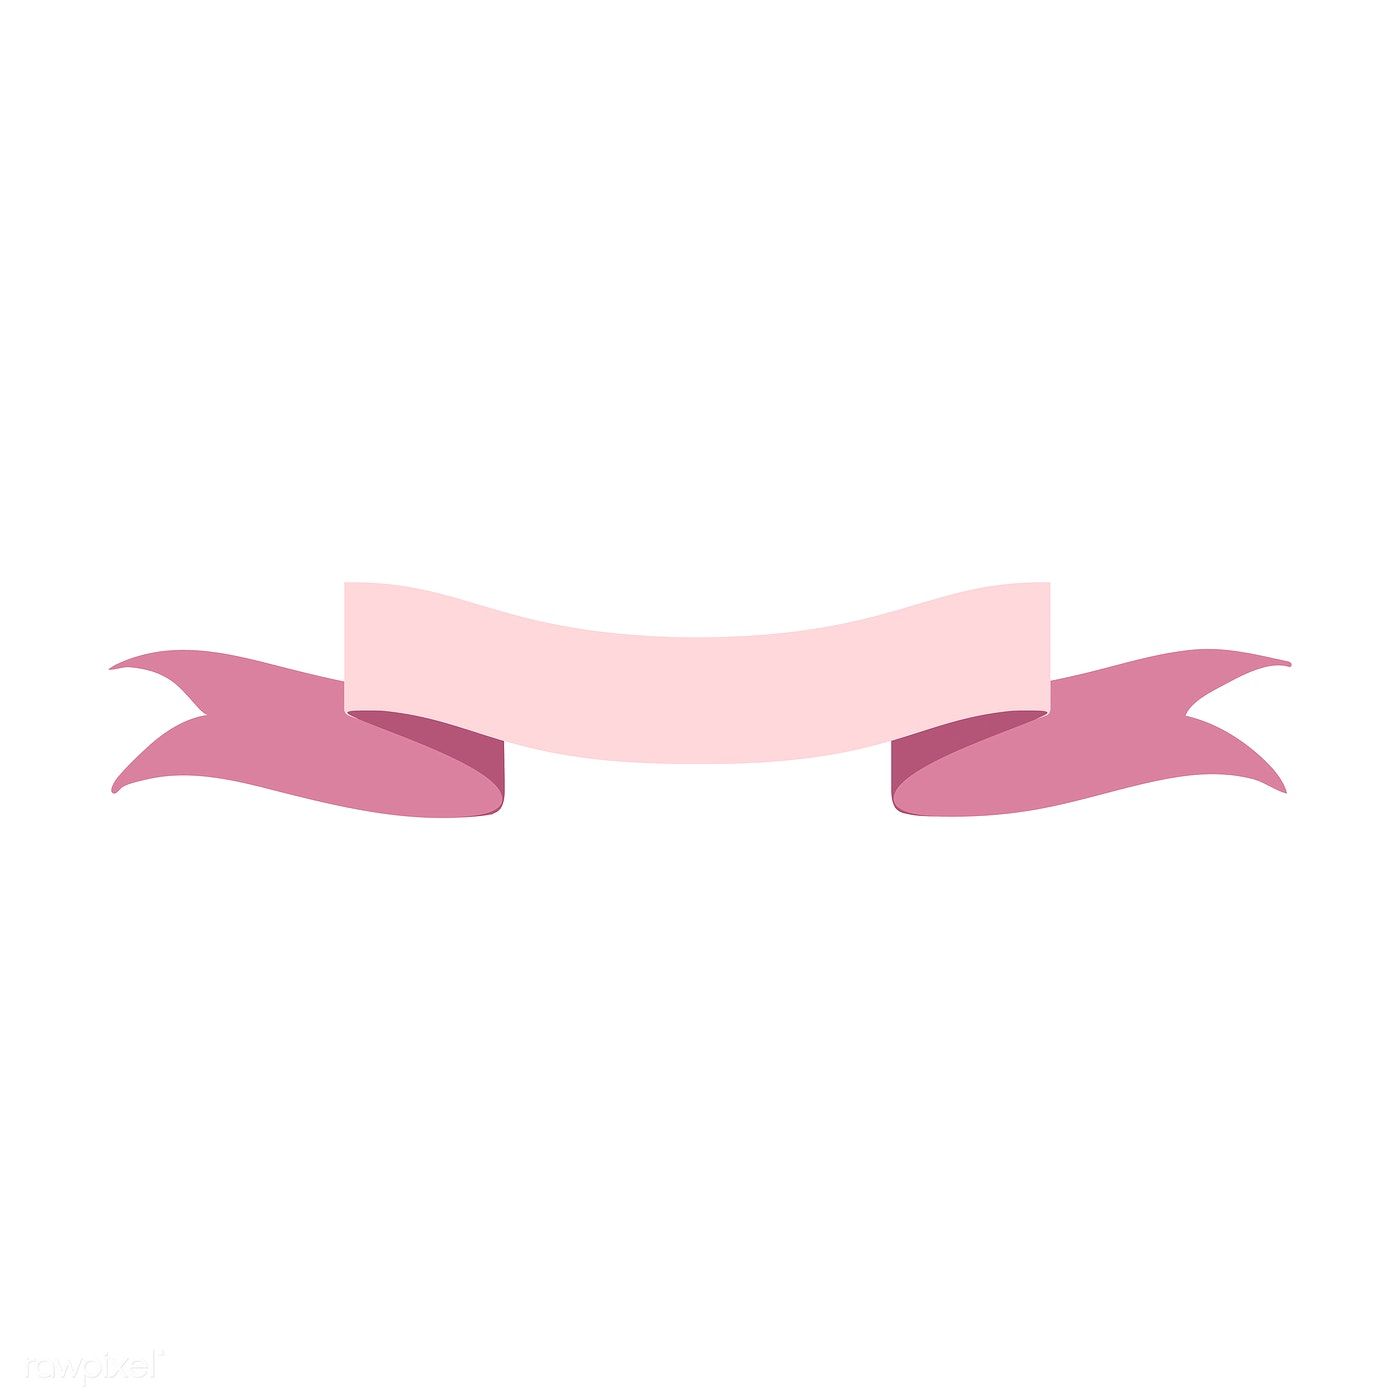 Pink ribbon banner doodle style vector